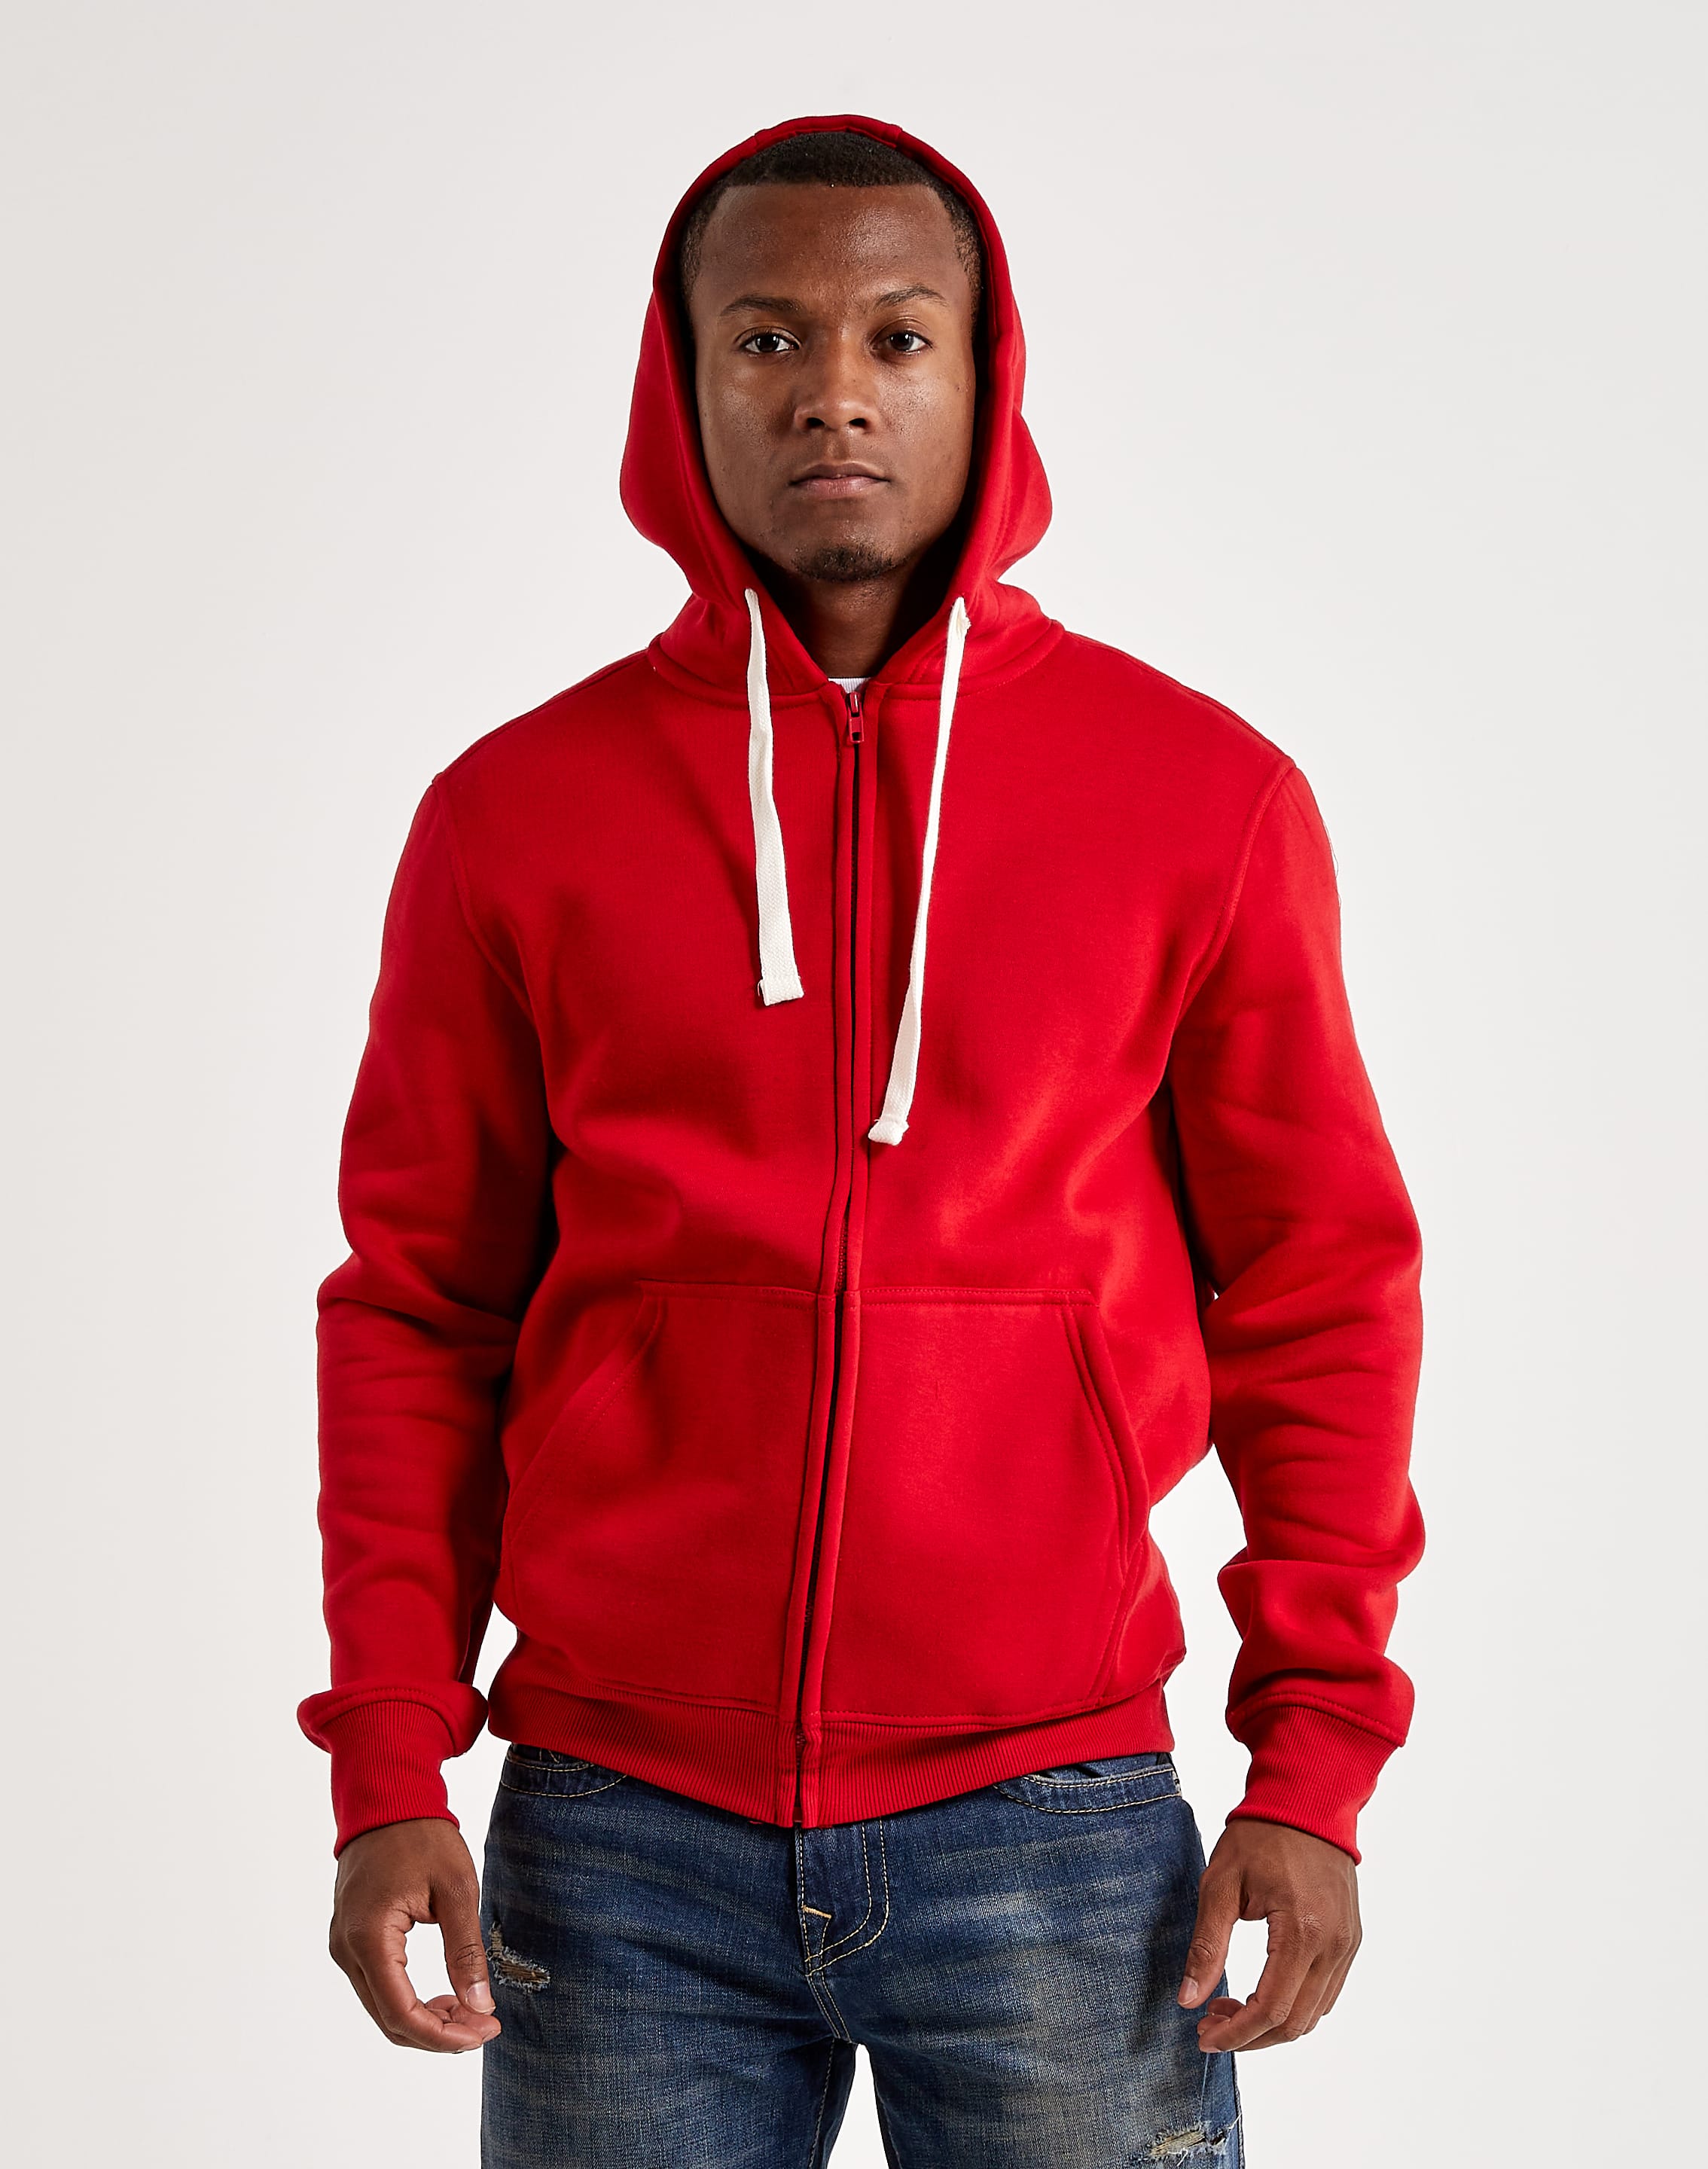 OFCL Essential Hoodie Red, Hottest Street wear brand, anywhere